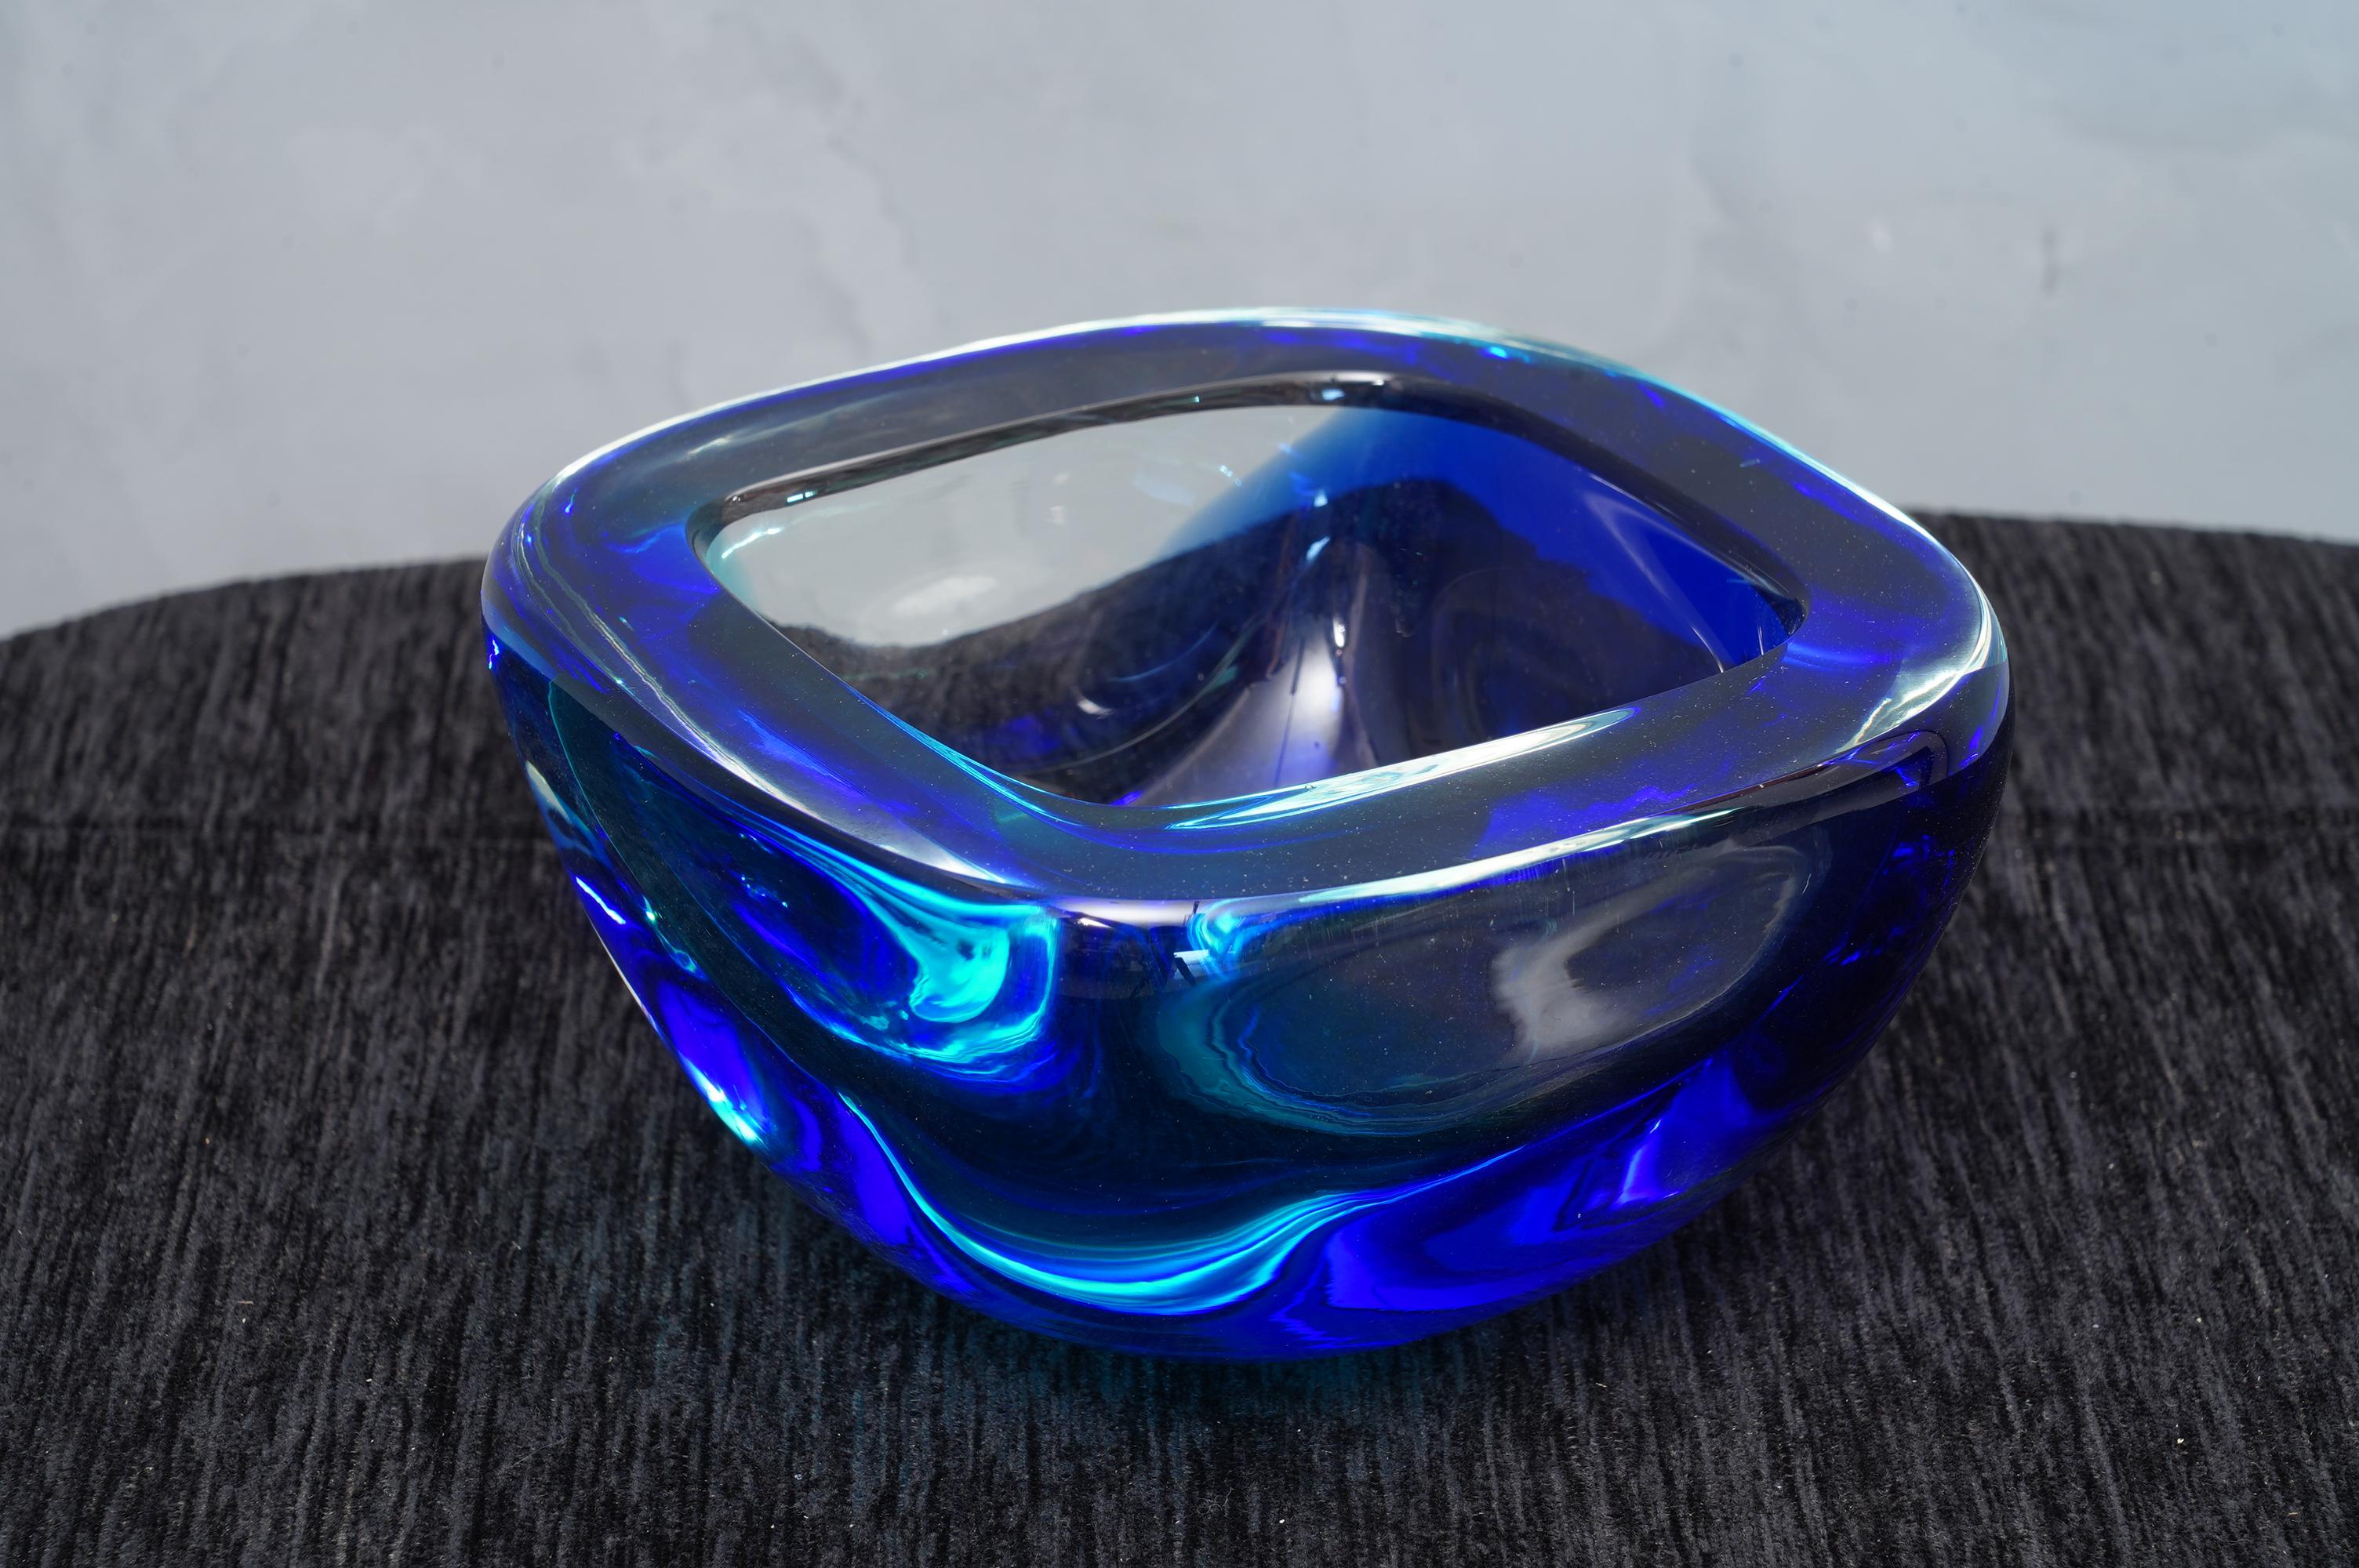 Ashtray formed by a particular submerged glass, signed Venini, with a wonderful double blue and azure color.

The ashtray is in Murano glass, square in shape, and with a particular transparent blue and azure color. The signature is placed on the